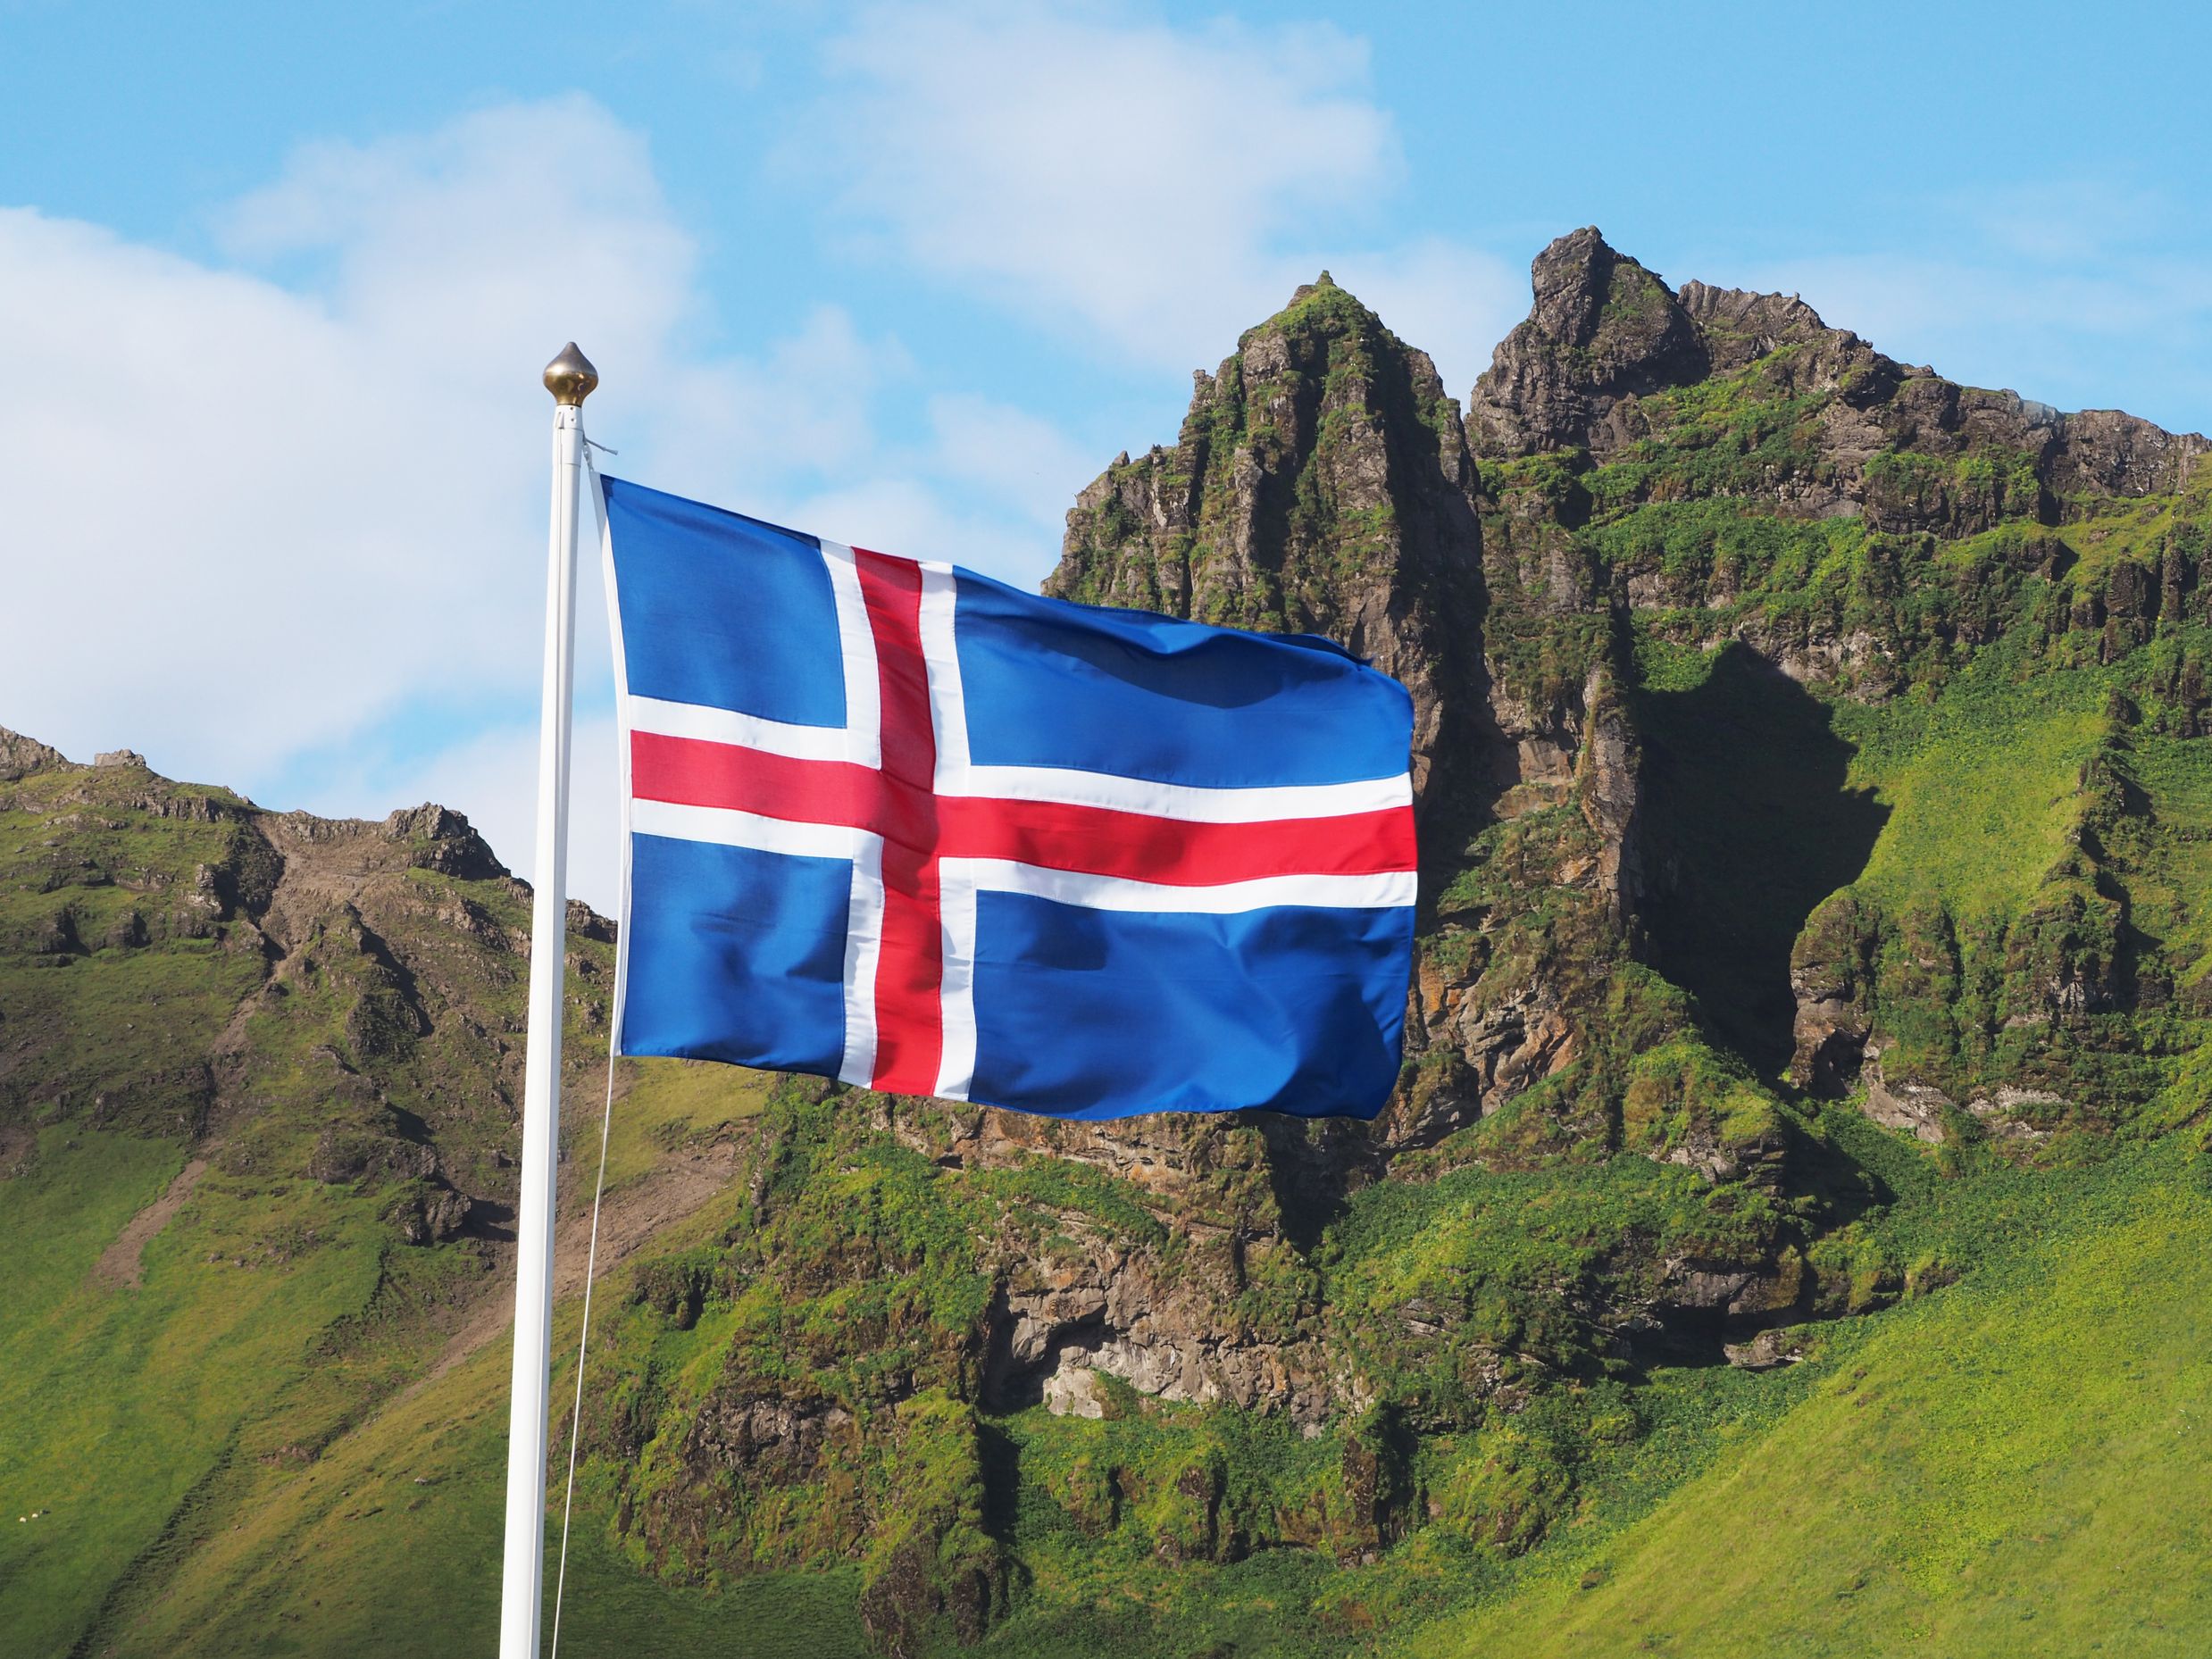 Flag and a question, what language do they speak in iceland?